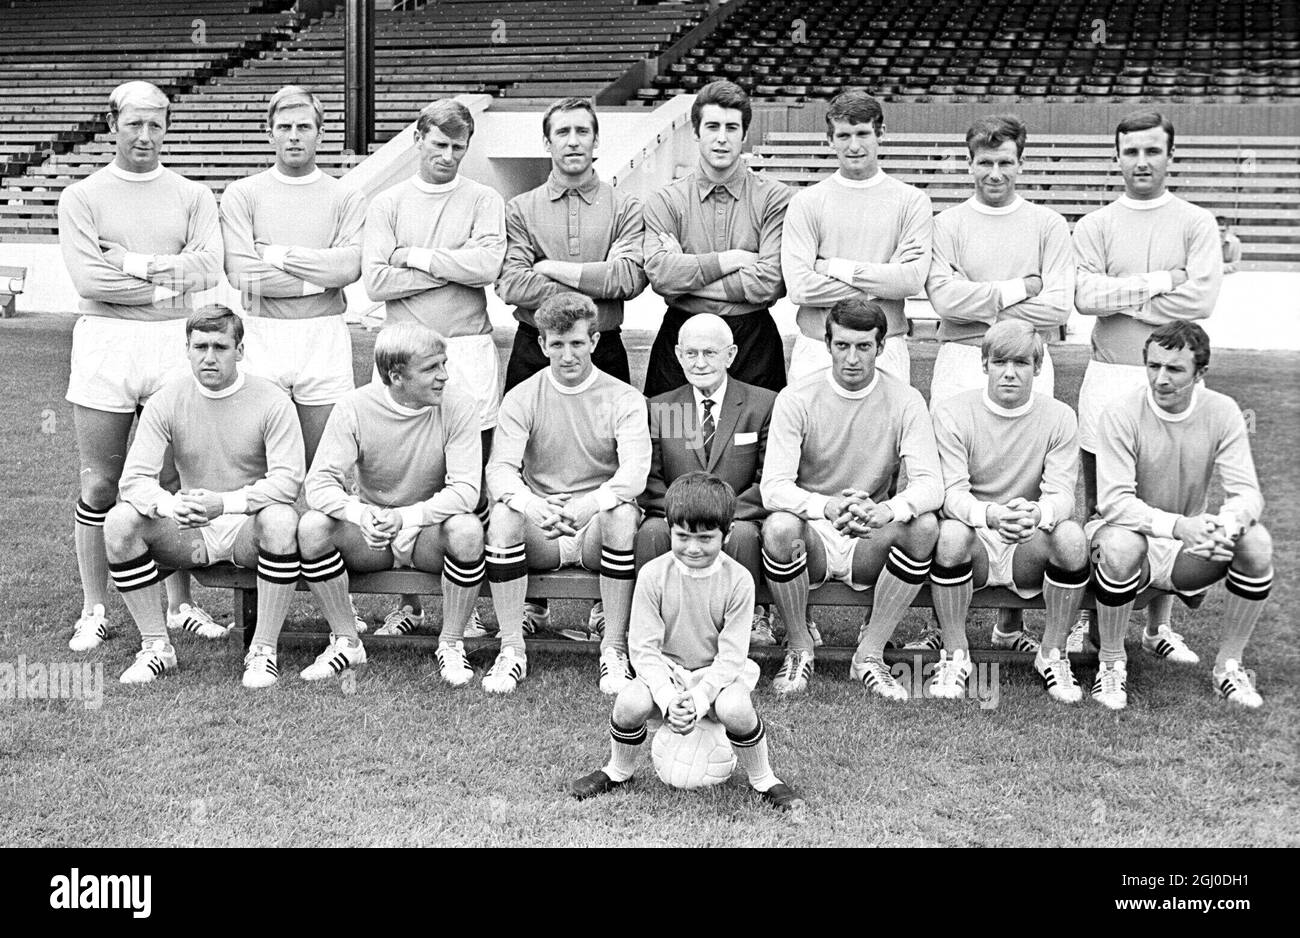 Members of the Manchester City Football Club for 1968-1969 season. Back Row:Left to Right: George Heslop, Alan Oaks, Tony Book, Harry Dowd, Ken Mulhearn, Mike Doyle, Bobby Kennedy, Glyn Pardoe. Front Row:Left to Right:Dave Connor, Francis Lee, Bobby Owen, A.Alexander (Chairman), Neil Young, Tony Coleman and Mike Summerbee. 31st July 1968. Stock Photo